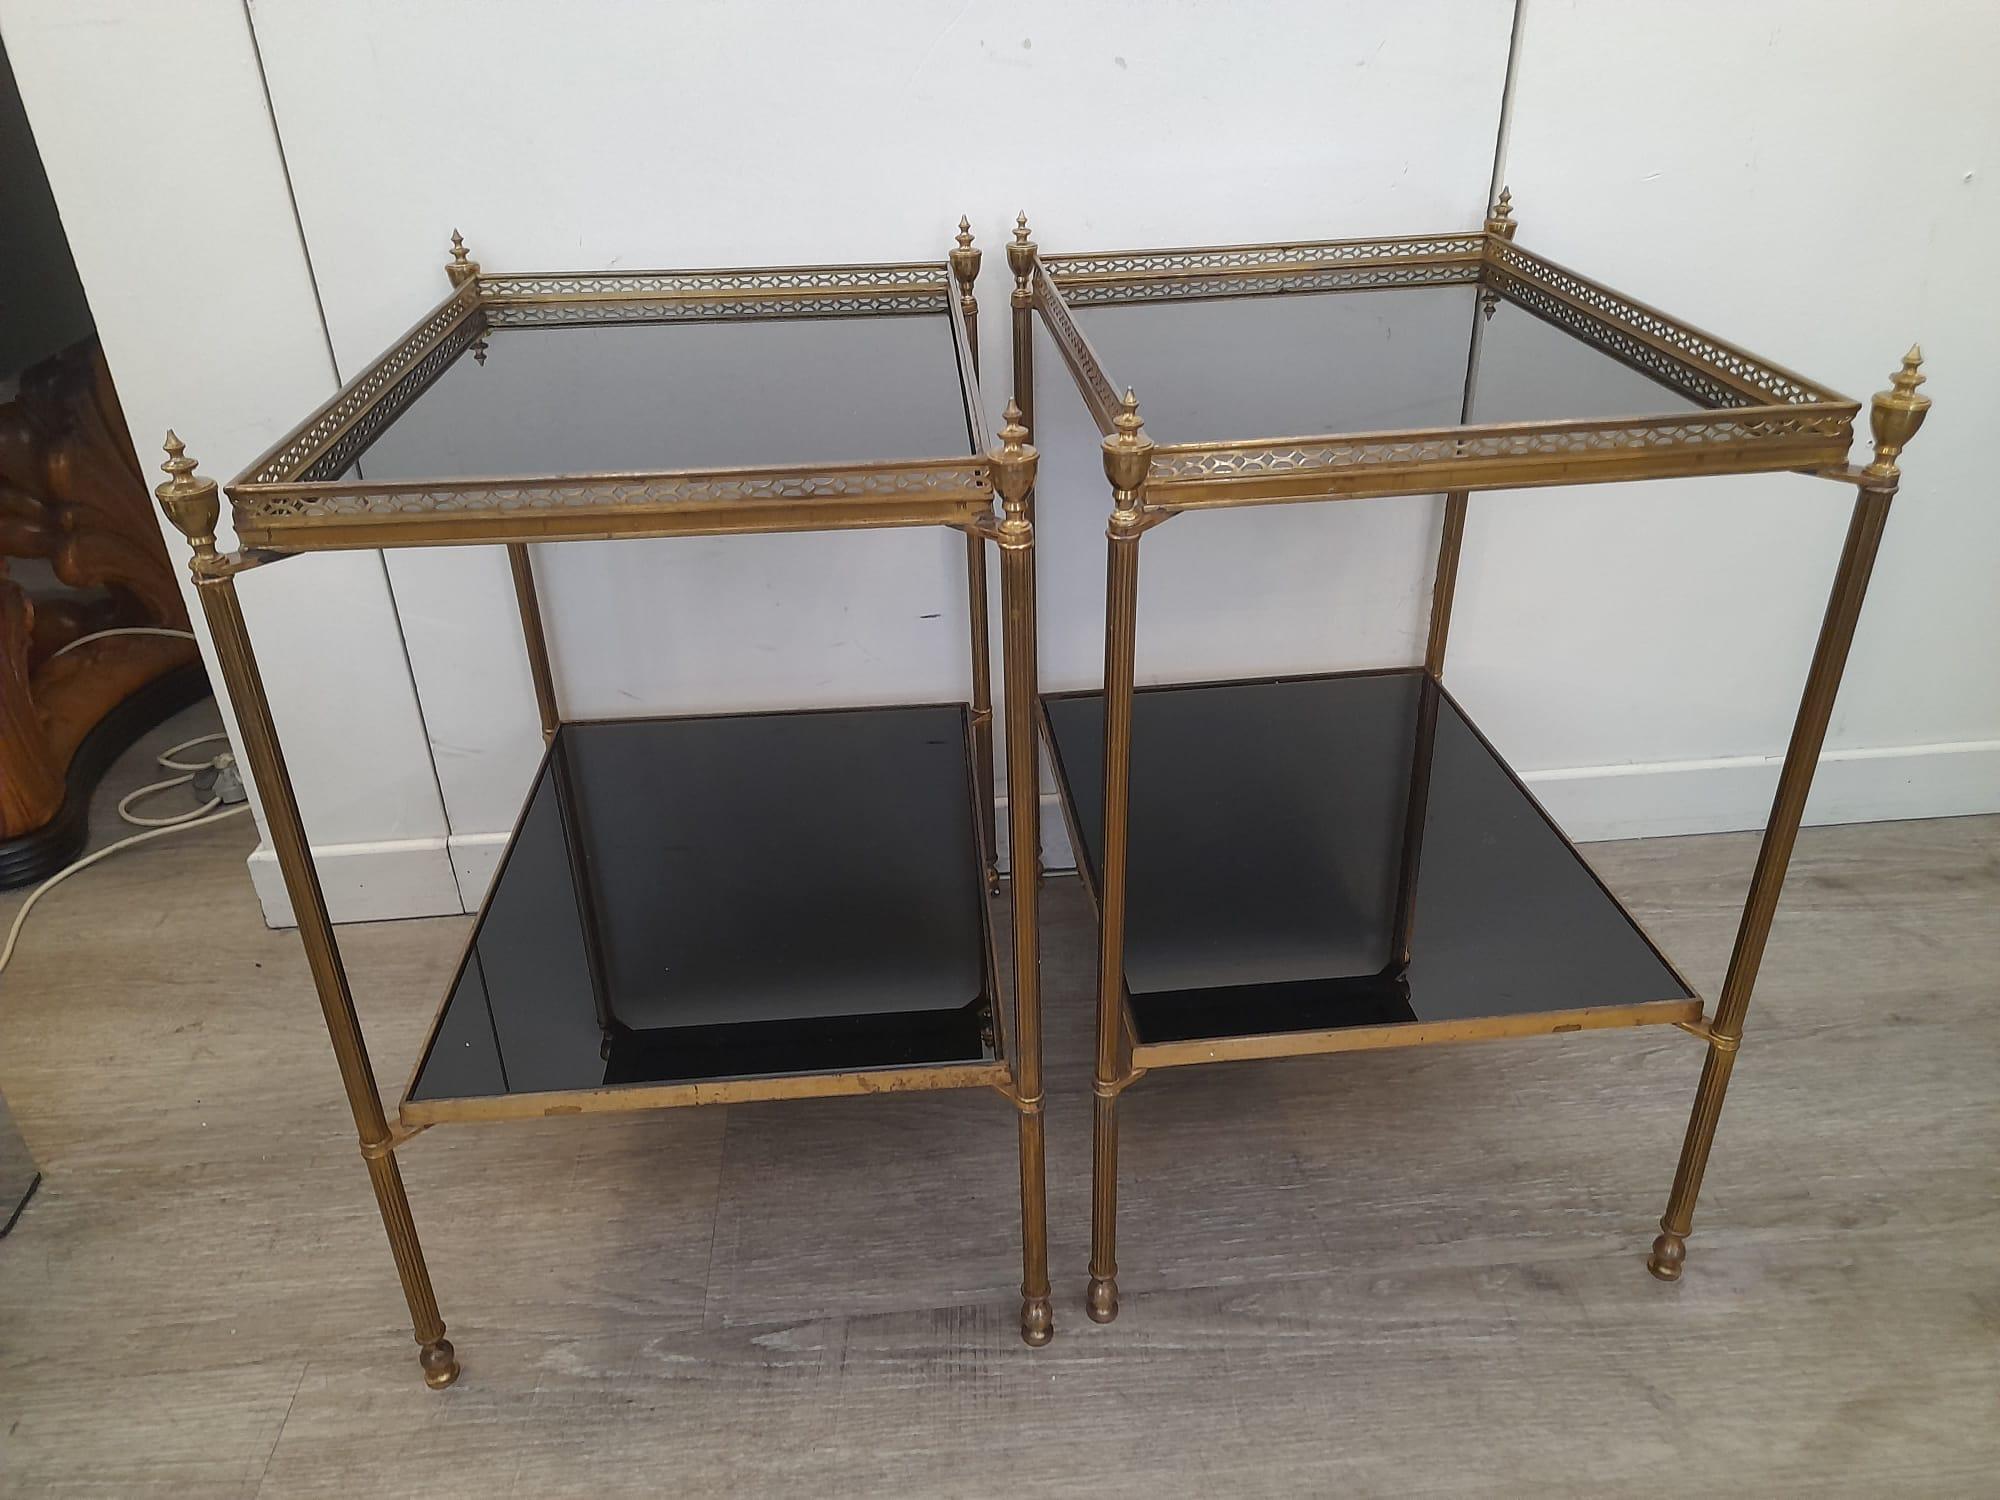 1970s Solid brass black glasses shelves attributed to Maison Jansen two tables.

A pair of identical tables featuring two black glass shelves and solid brass structure.

Each table measures: W 45 cm, D 30 cm, H 53 cm.

They can be perfect in